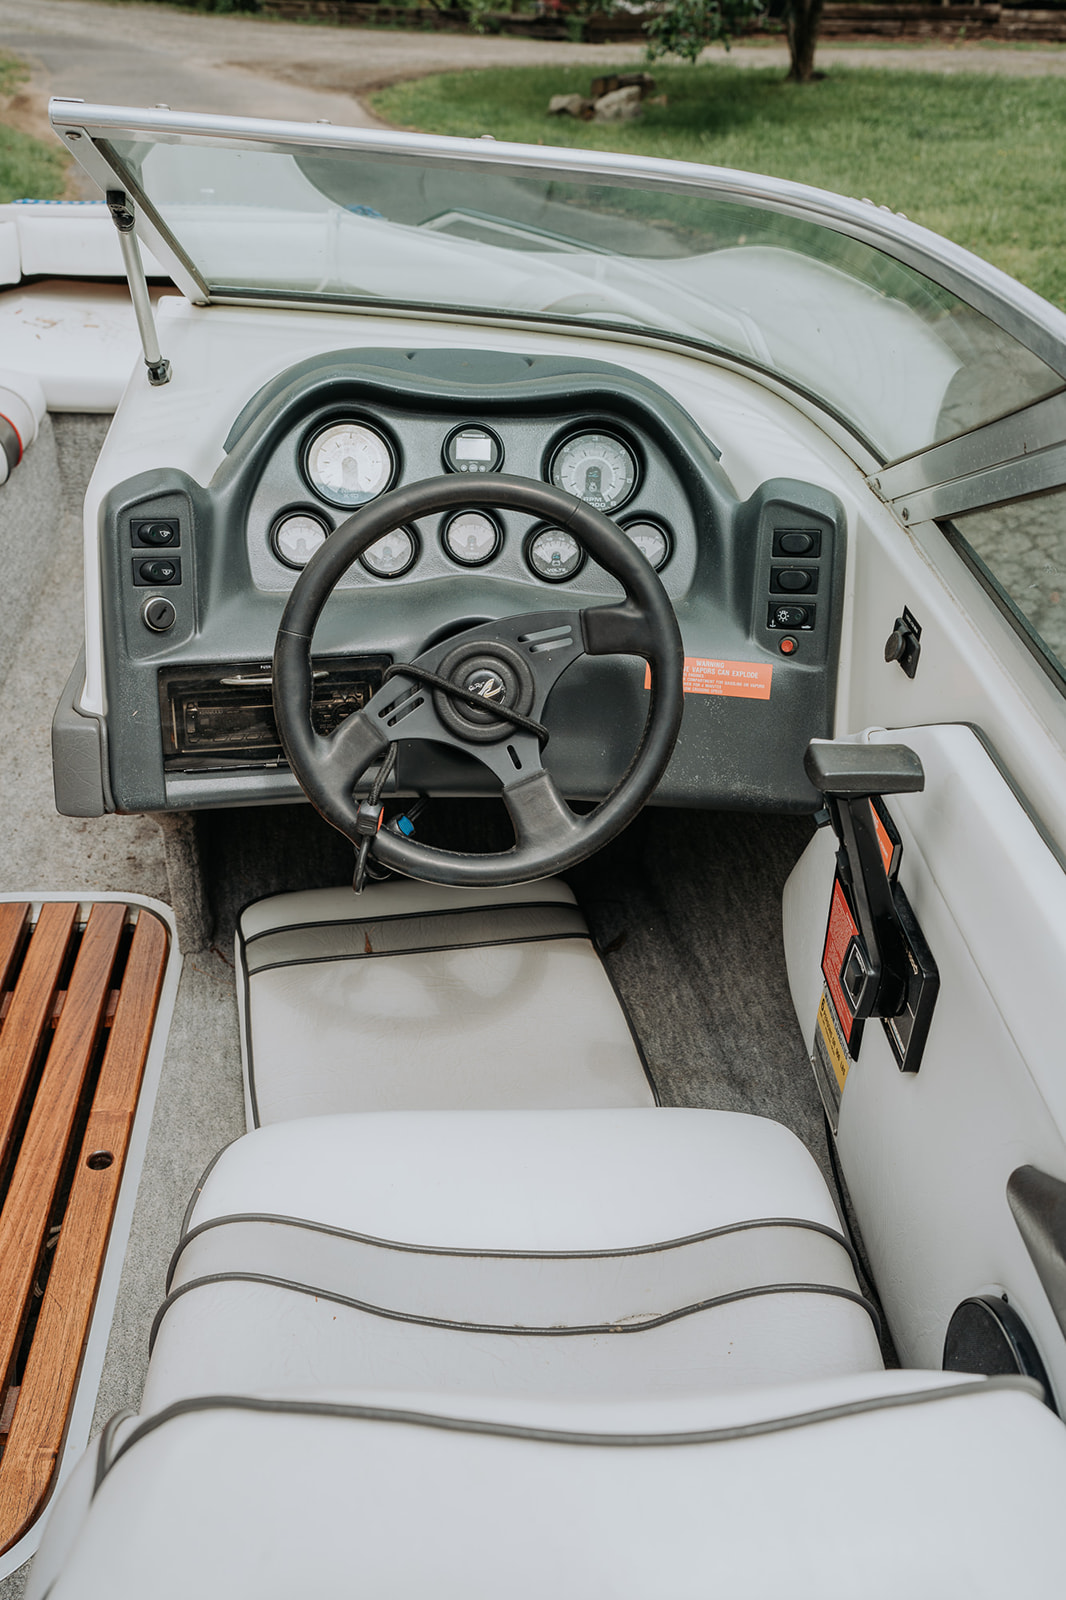 1991 Sea Ray 170 Bowrider Power boat for sale in Asheville, NC - image 6 